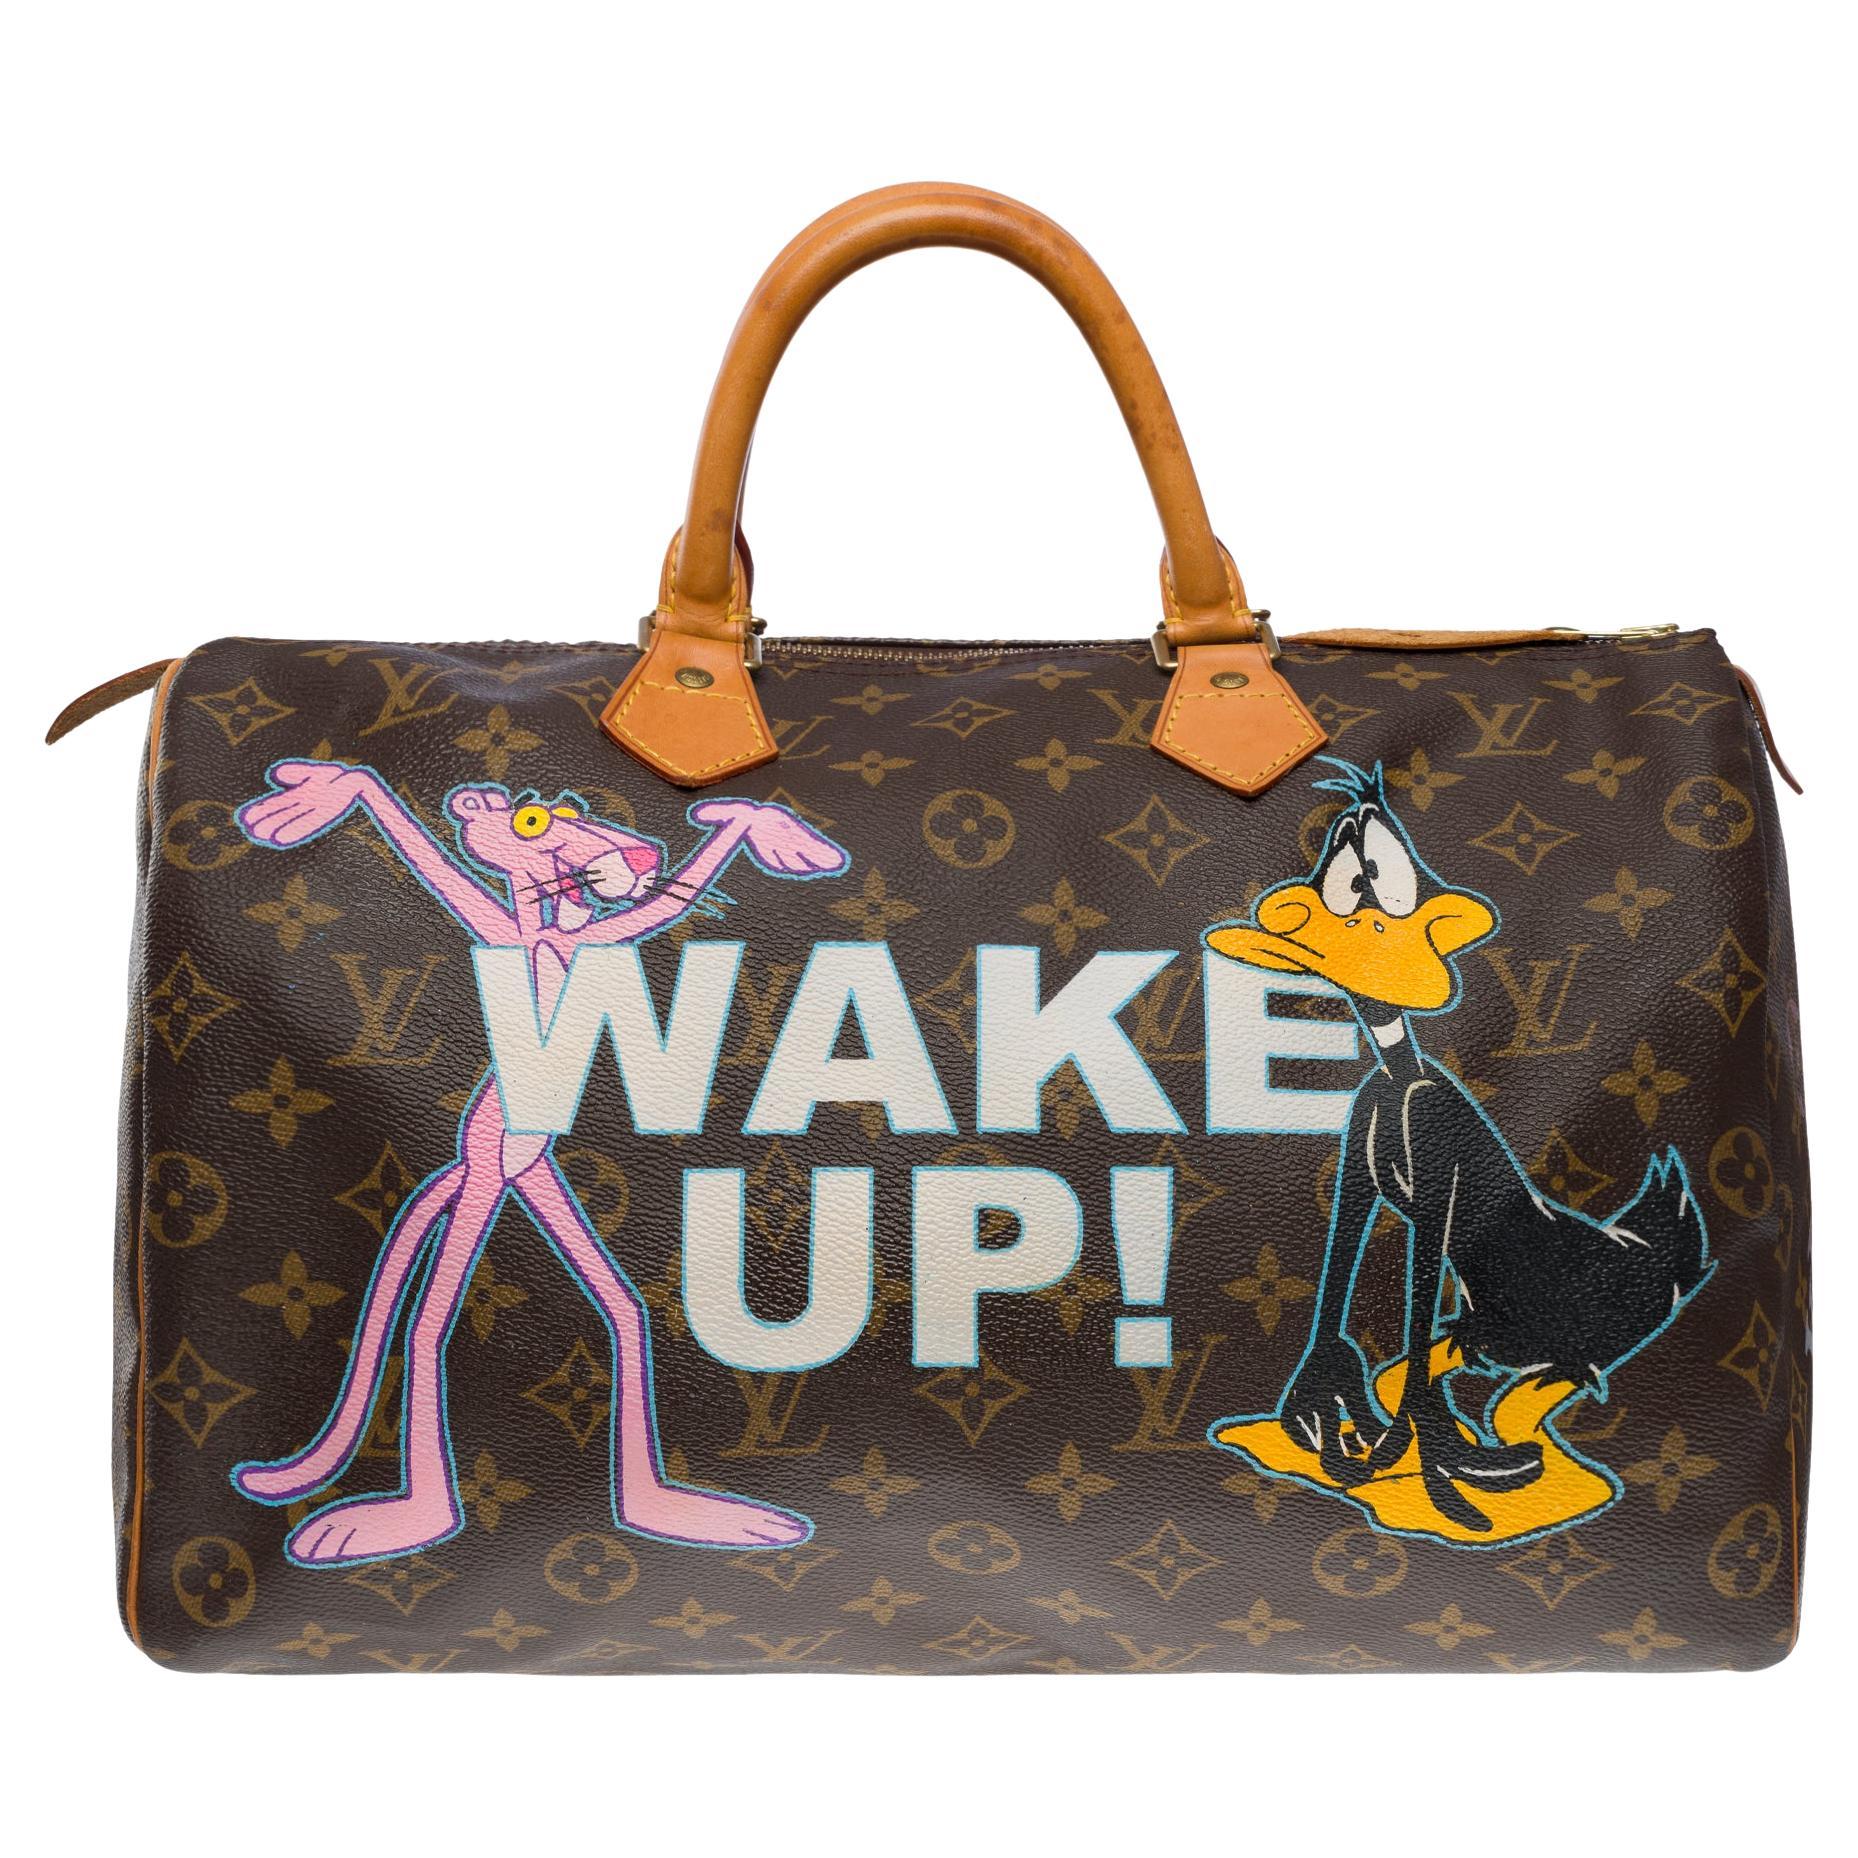 Customized Louis Vuitton Speedy 35 "Wake Up !" handbag in brown canvas, GHW For Sale